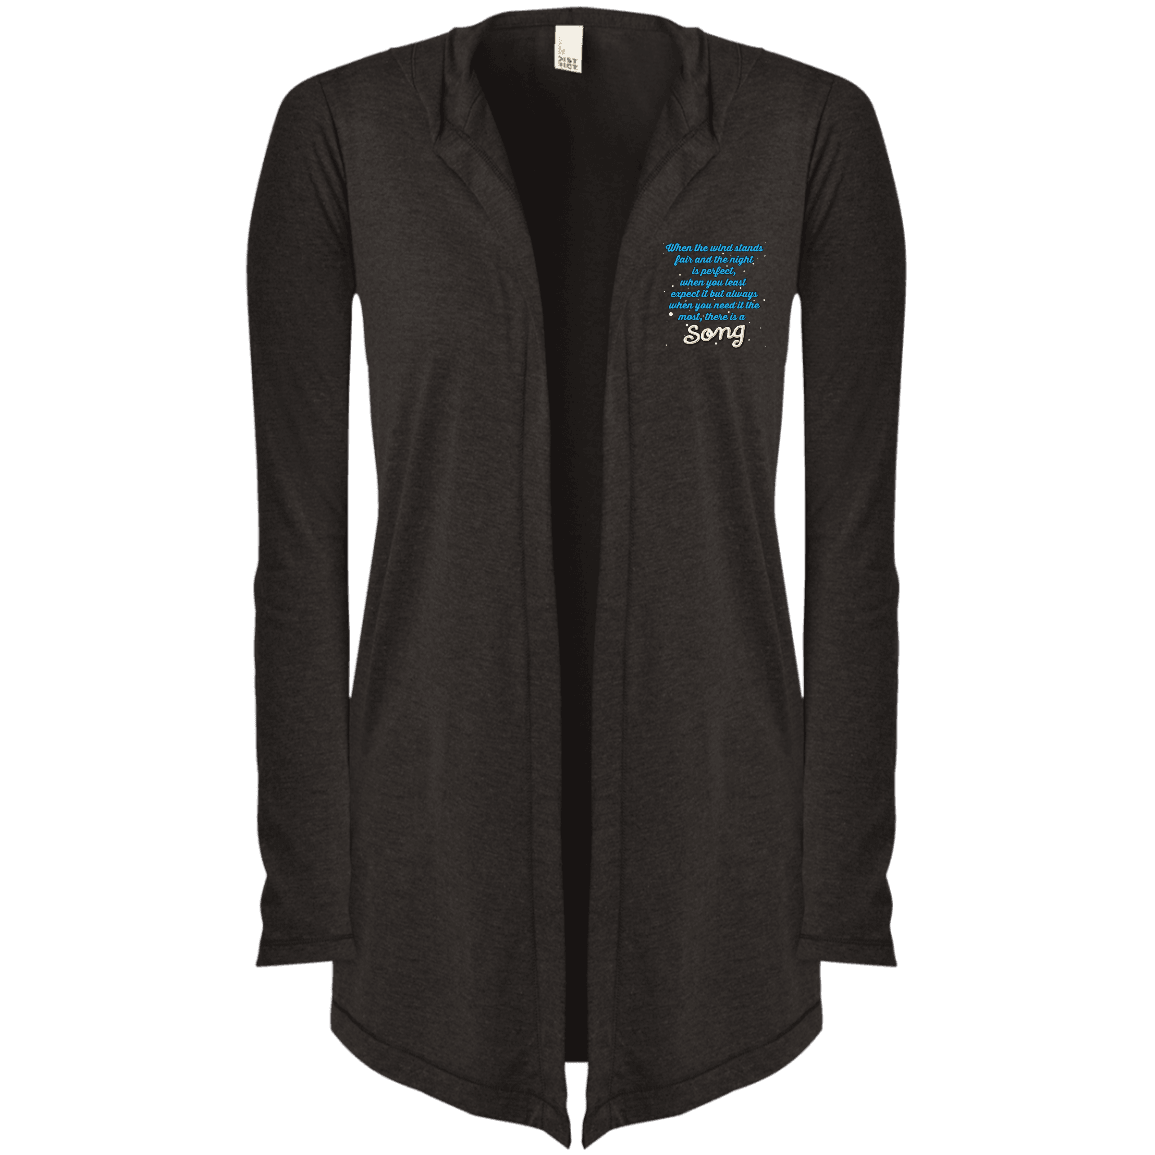 Designs by MyUtopia Shout Out:When you Need it the Most There Is A Song Embroidered Women's Hooded Cardigan,X-Small / Black Frost,Sweatshirts